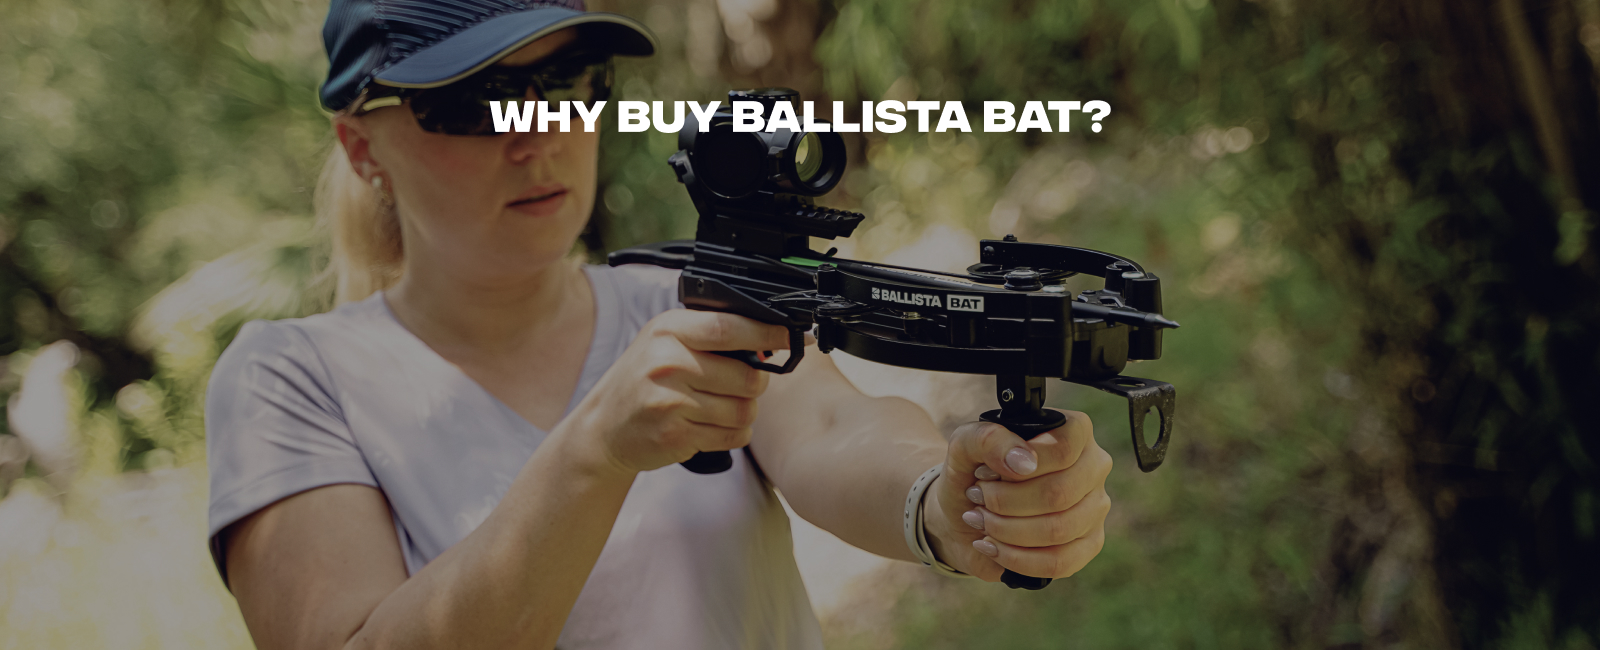 Why-buy-ballista-bat-video - BALLISTA Crossbows for Fishing, Hunting and Entertainment